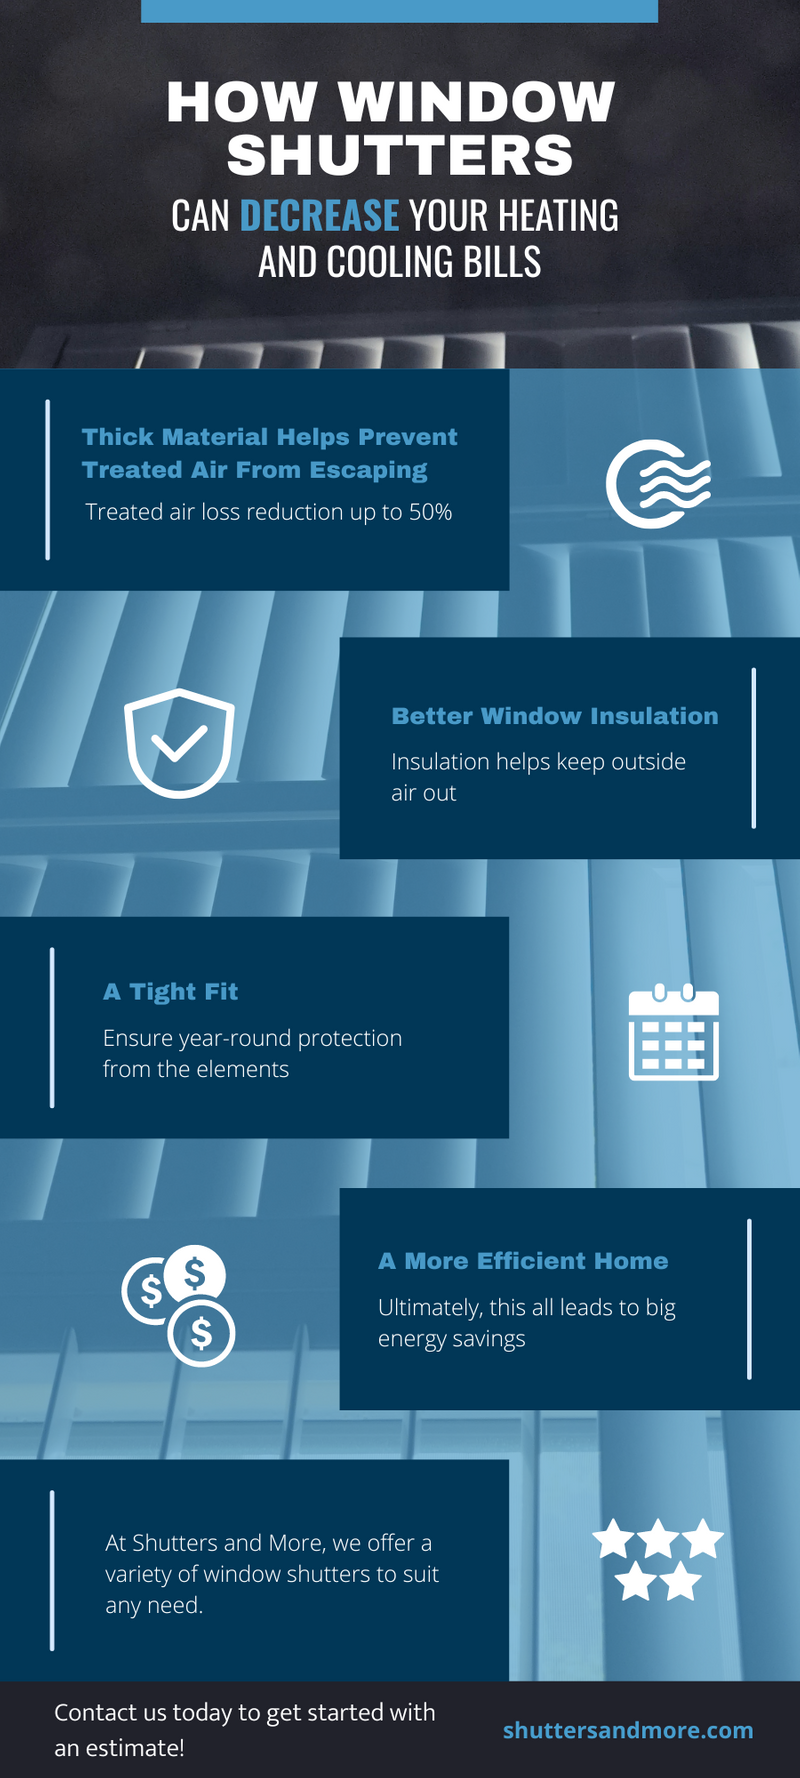 M24870 - Infographic - How Window Shutters Can Decrease Your Heating and Cooling Bills  (1).png